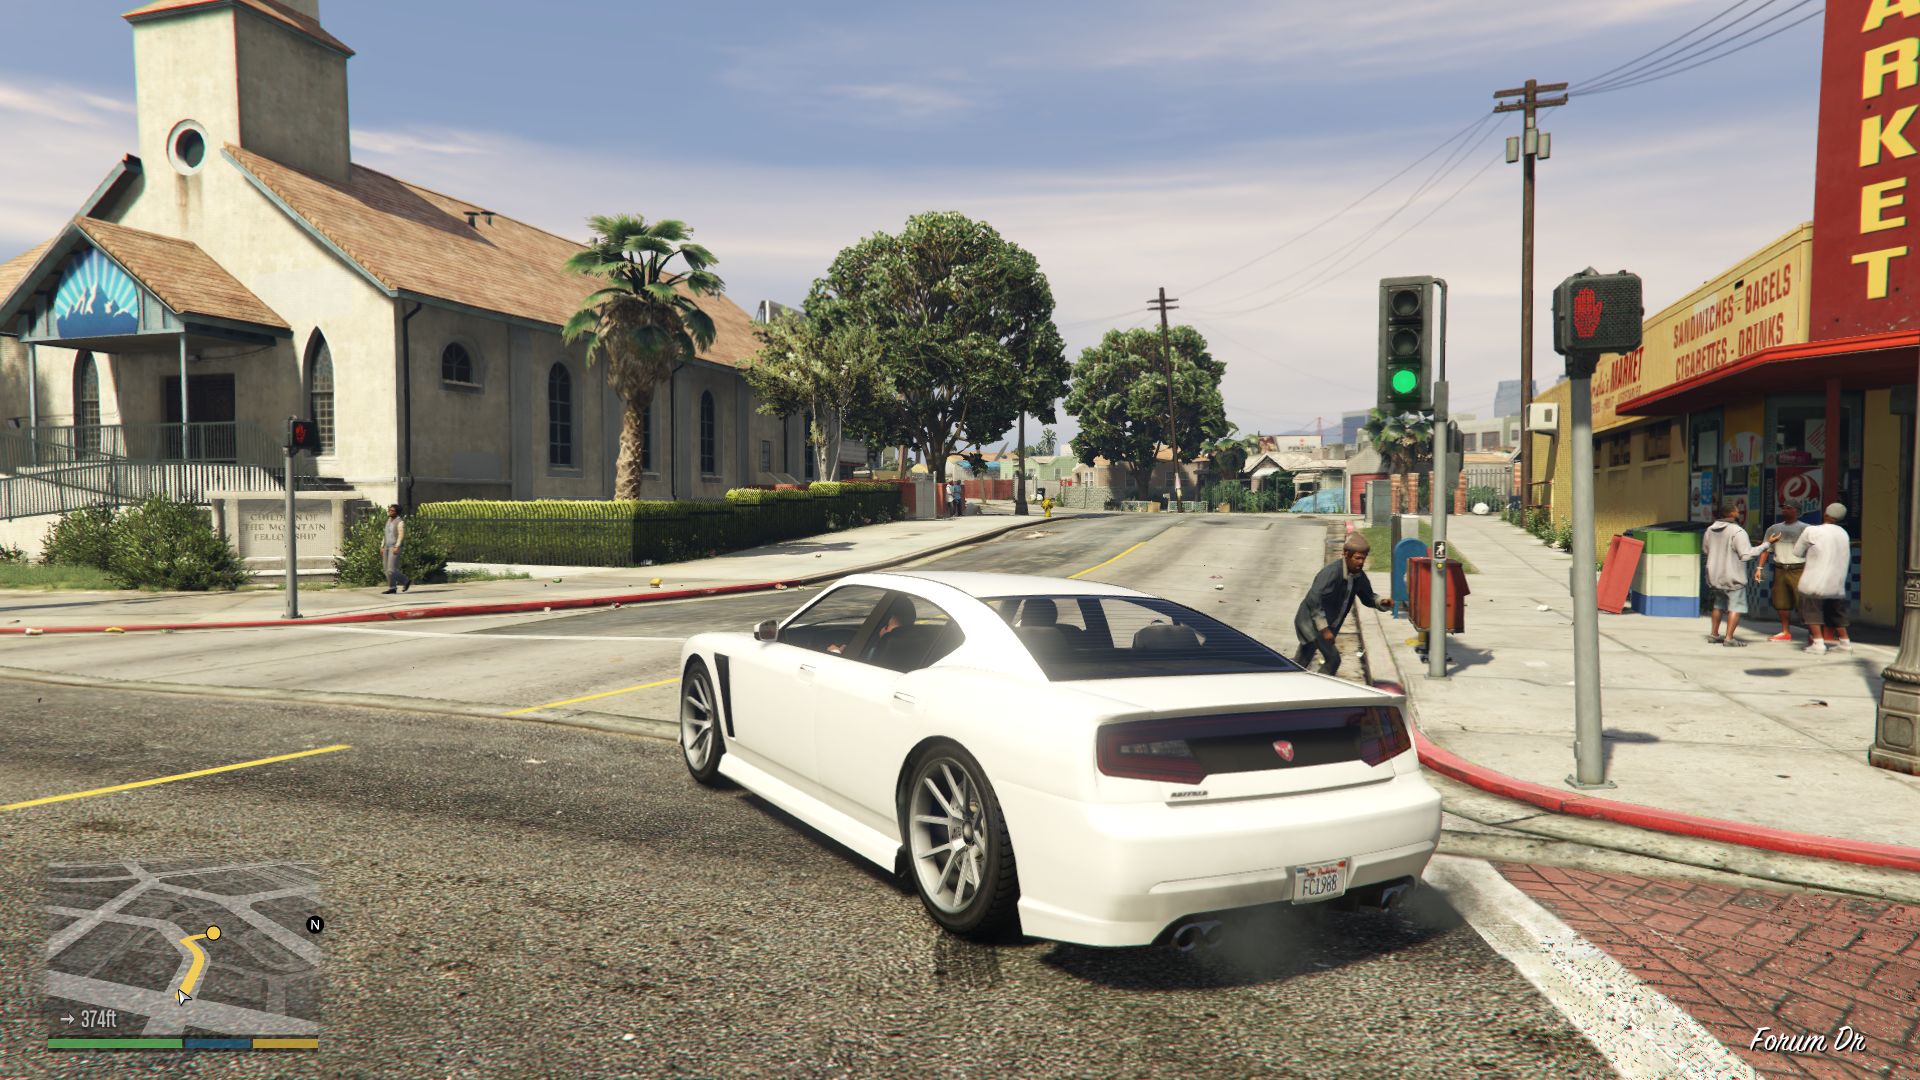 Grand Theft Auto V Benchmarked: Graphics & CPU Performance